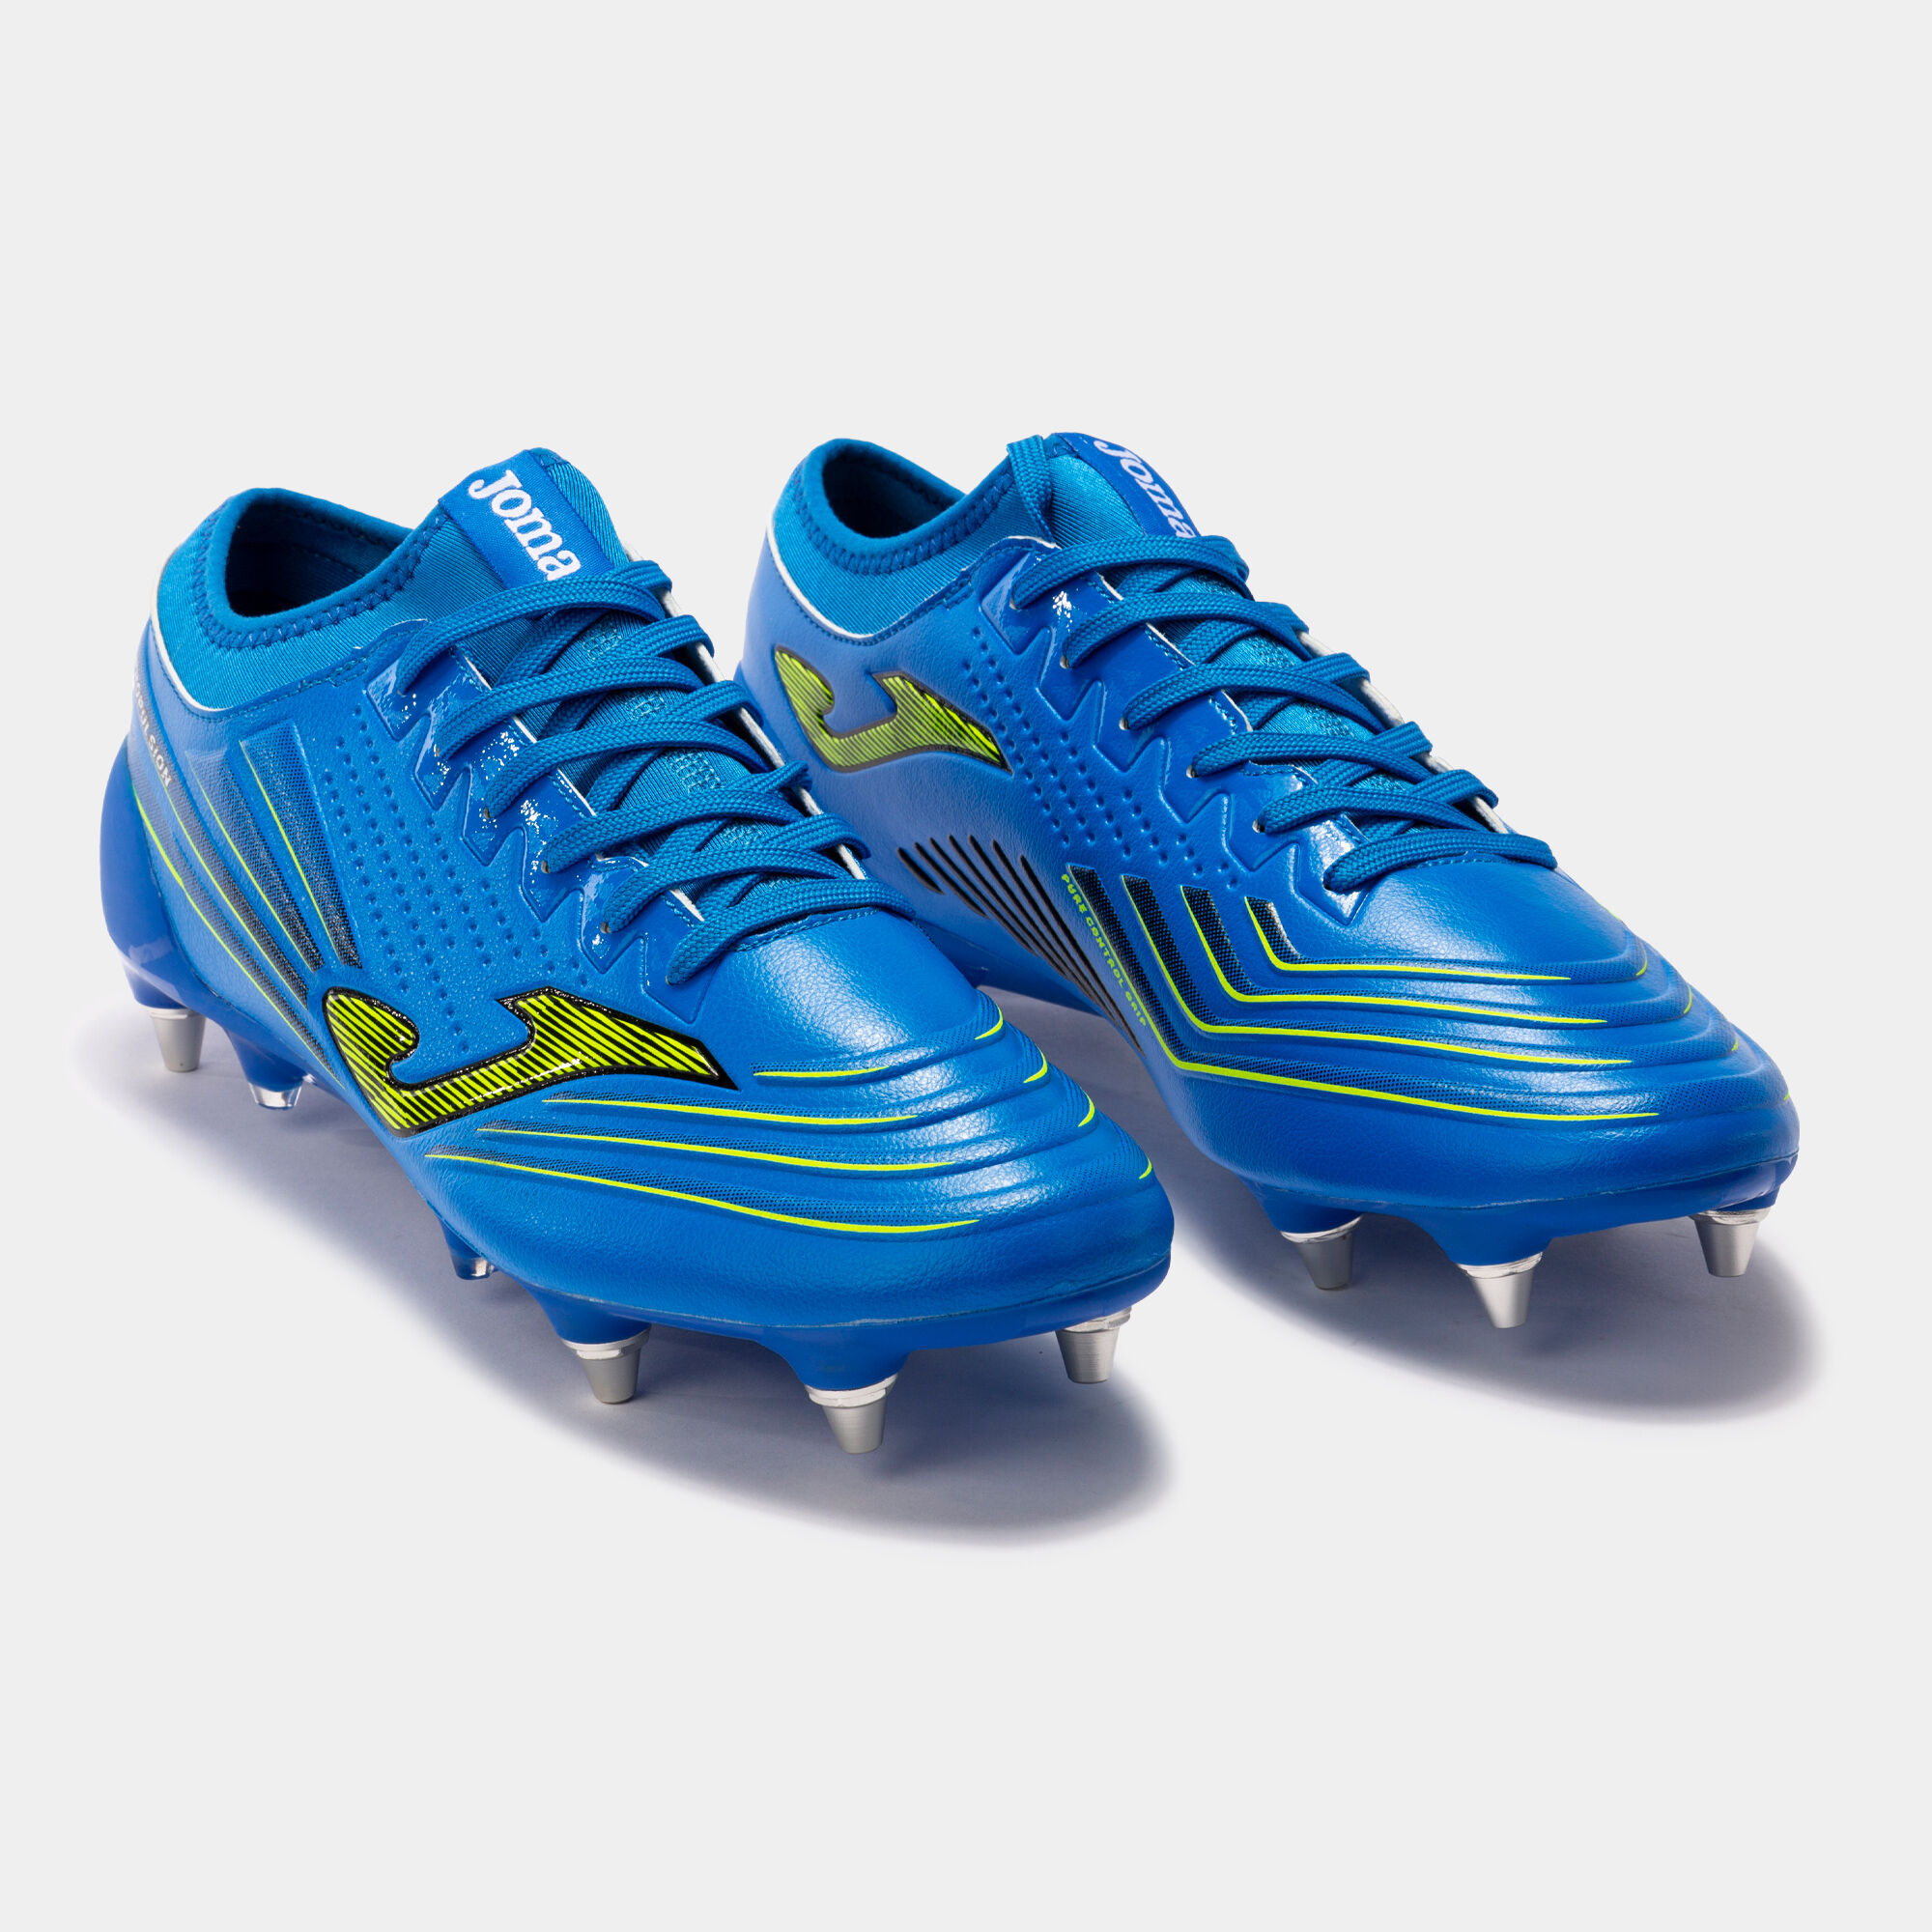 Football boots Propulsion Cup 21 soft ground royal blue